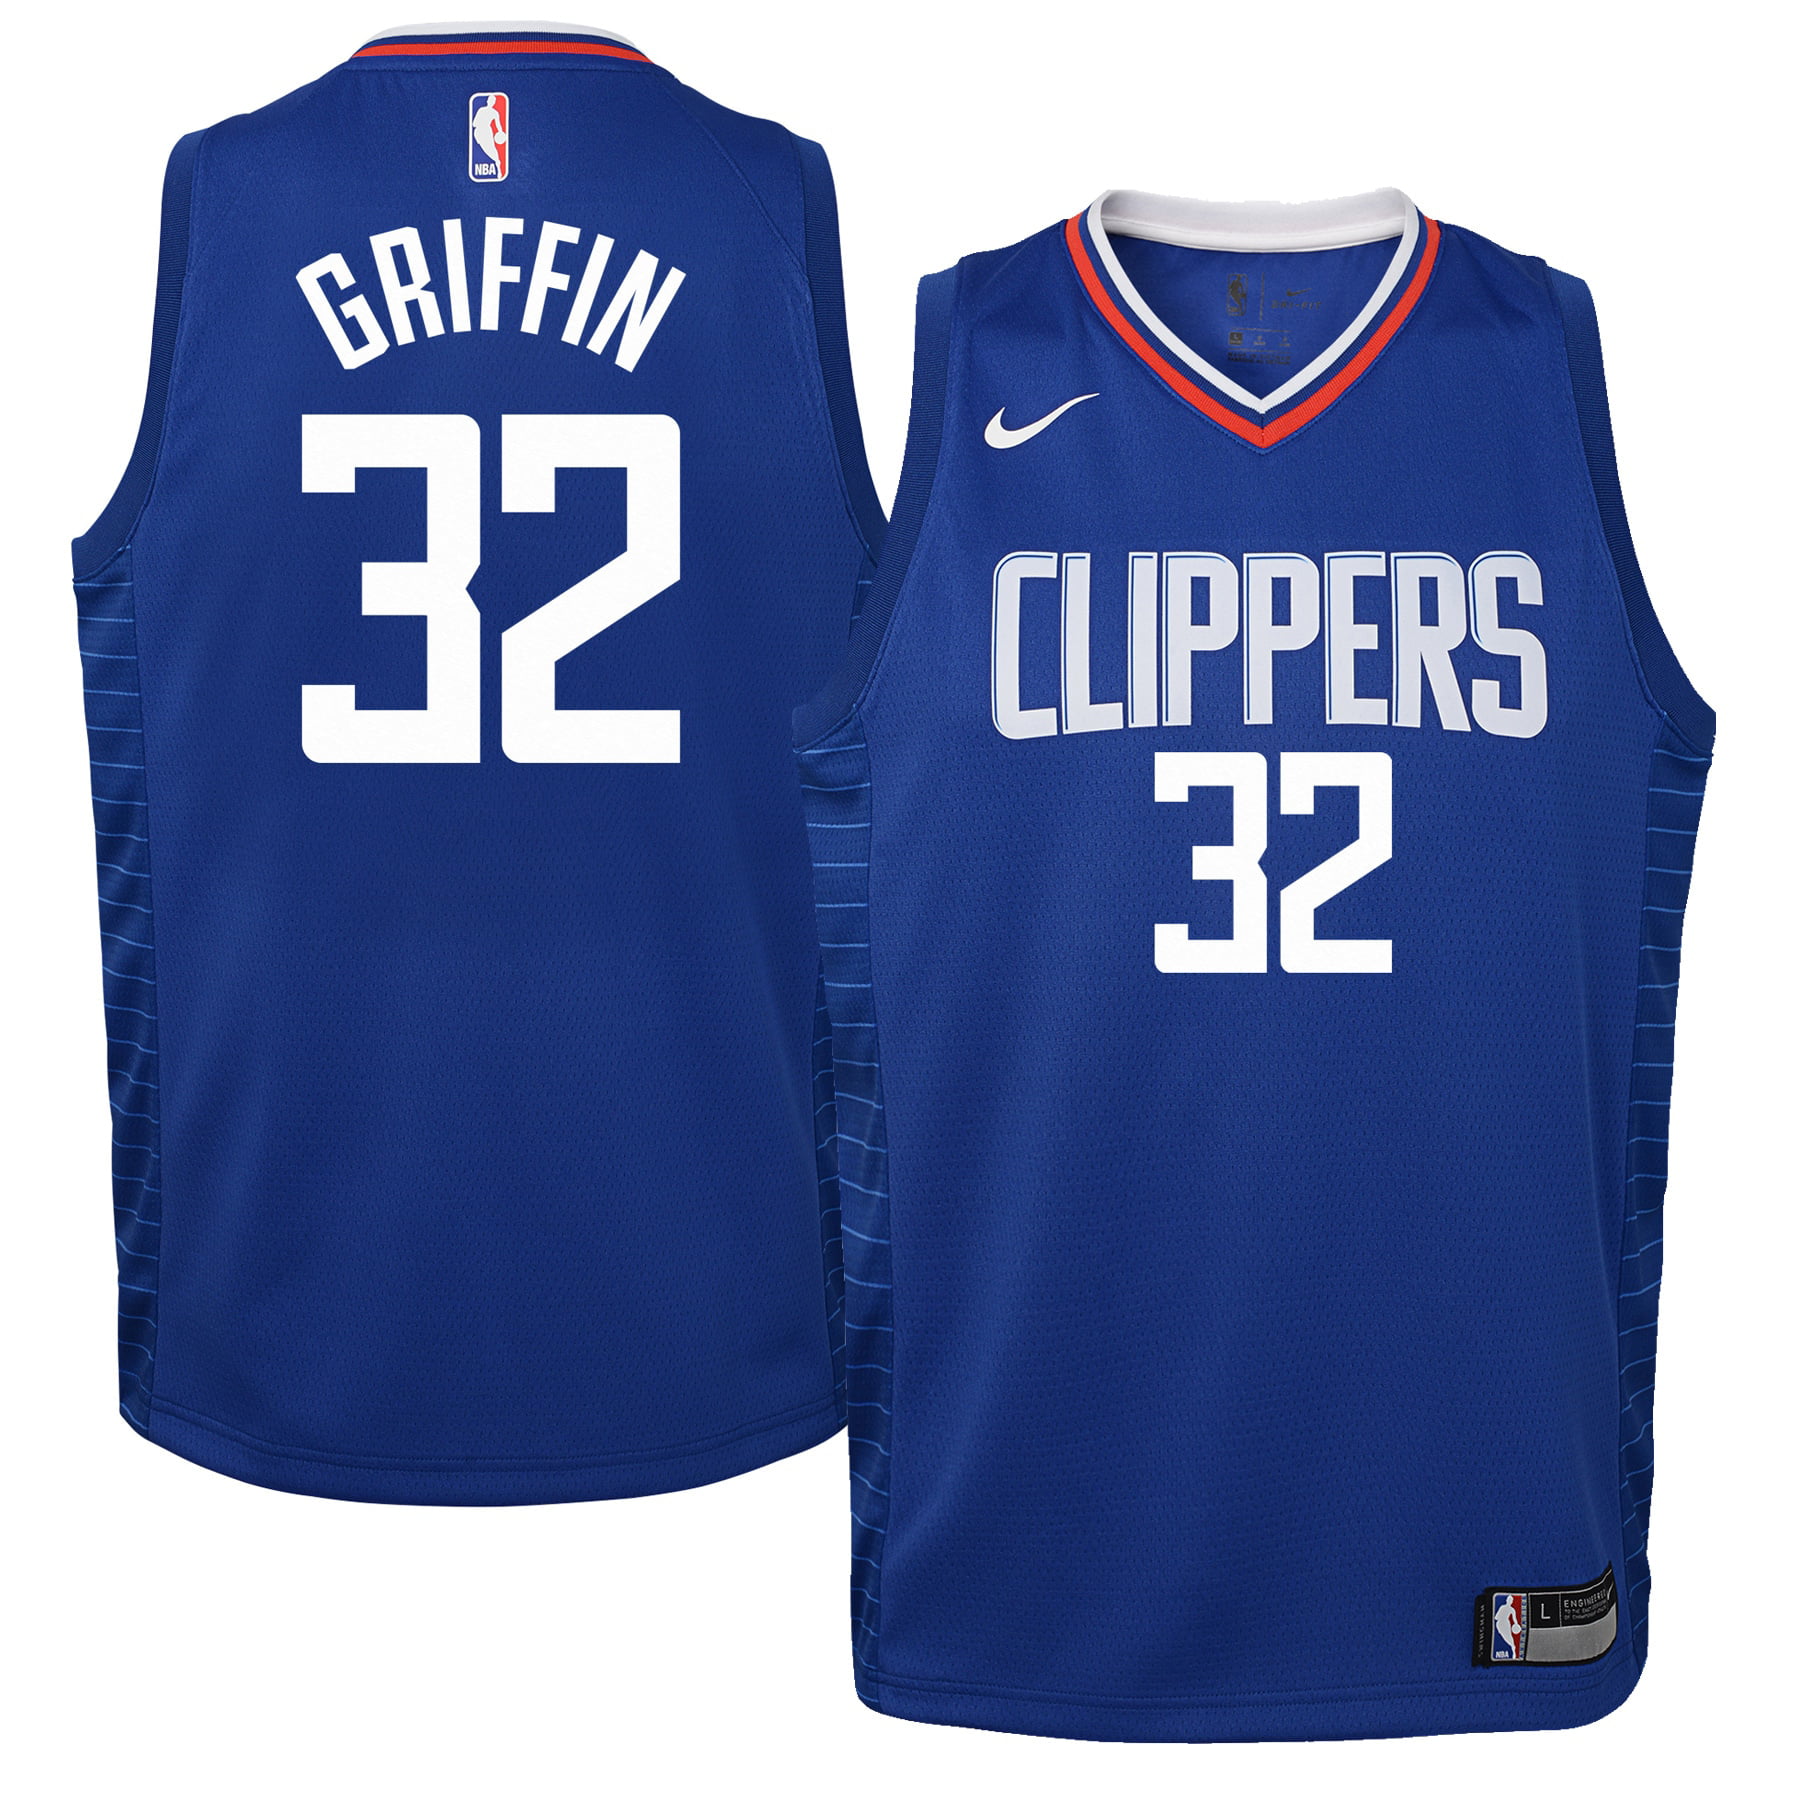 clippers griffin jersey